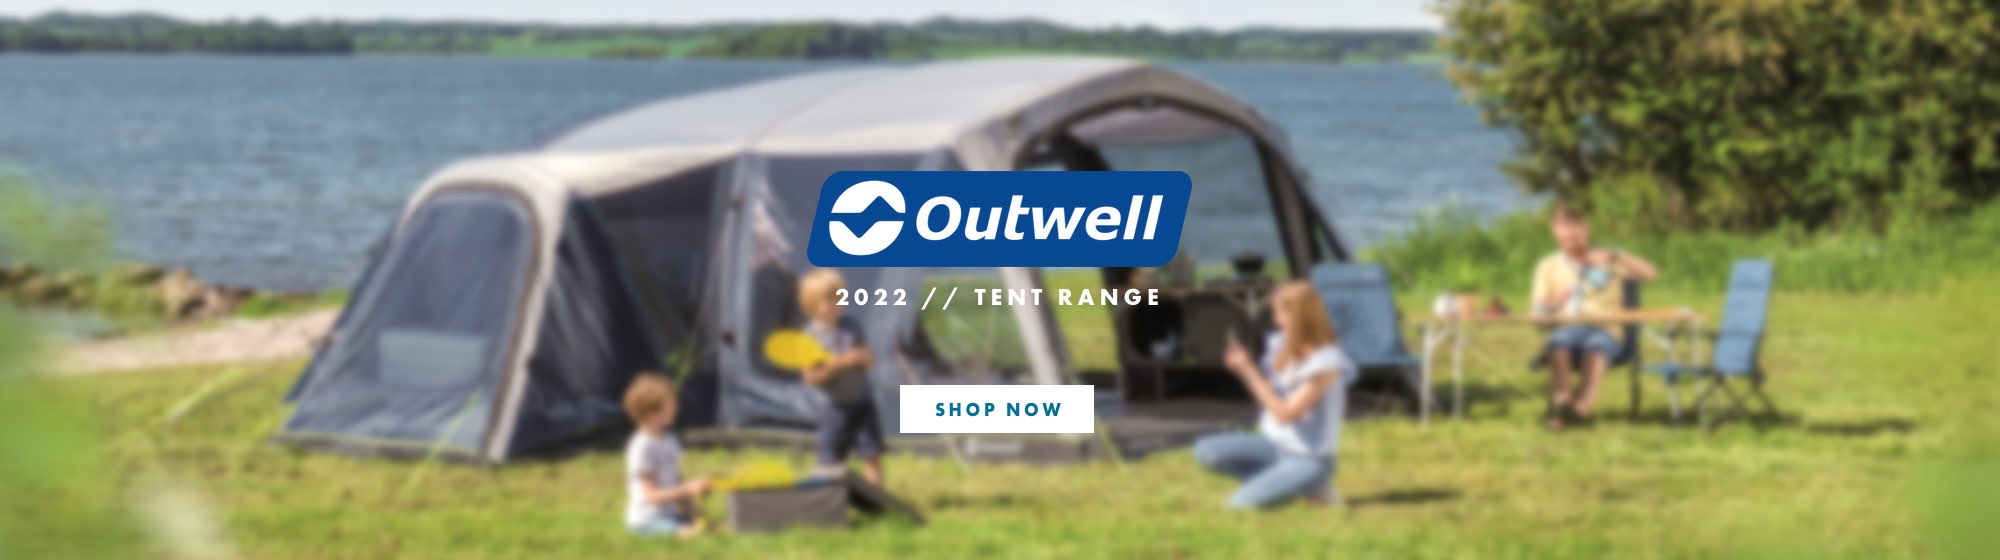 Shop for Outwell Tents - 2022 Collection